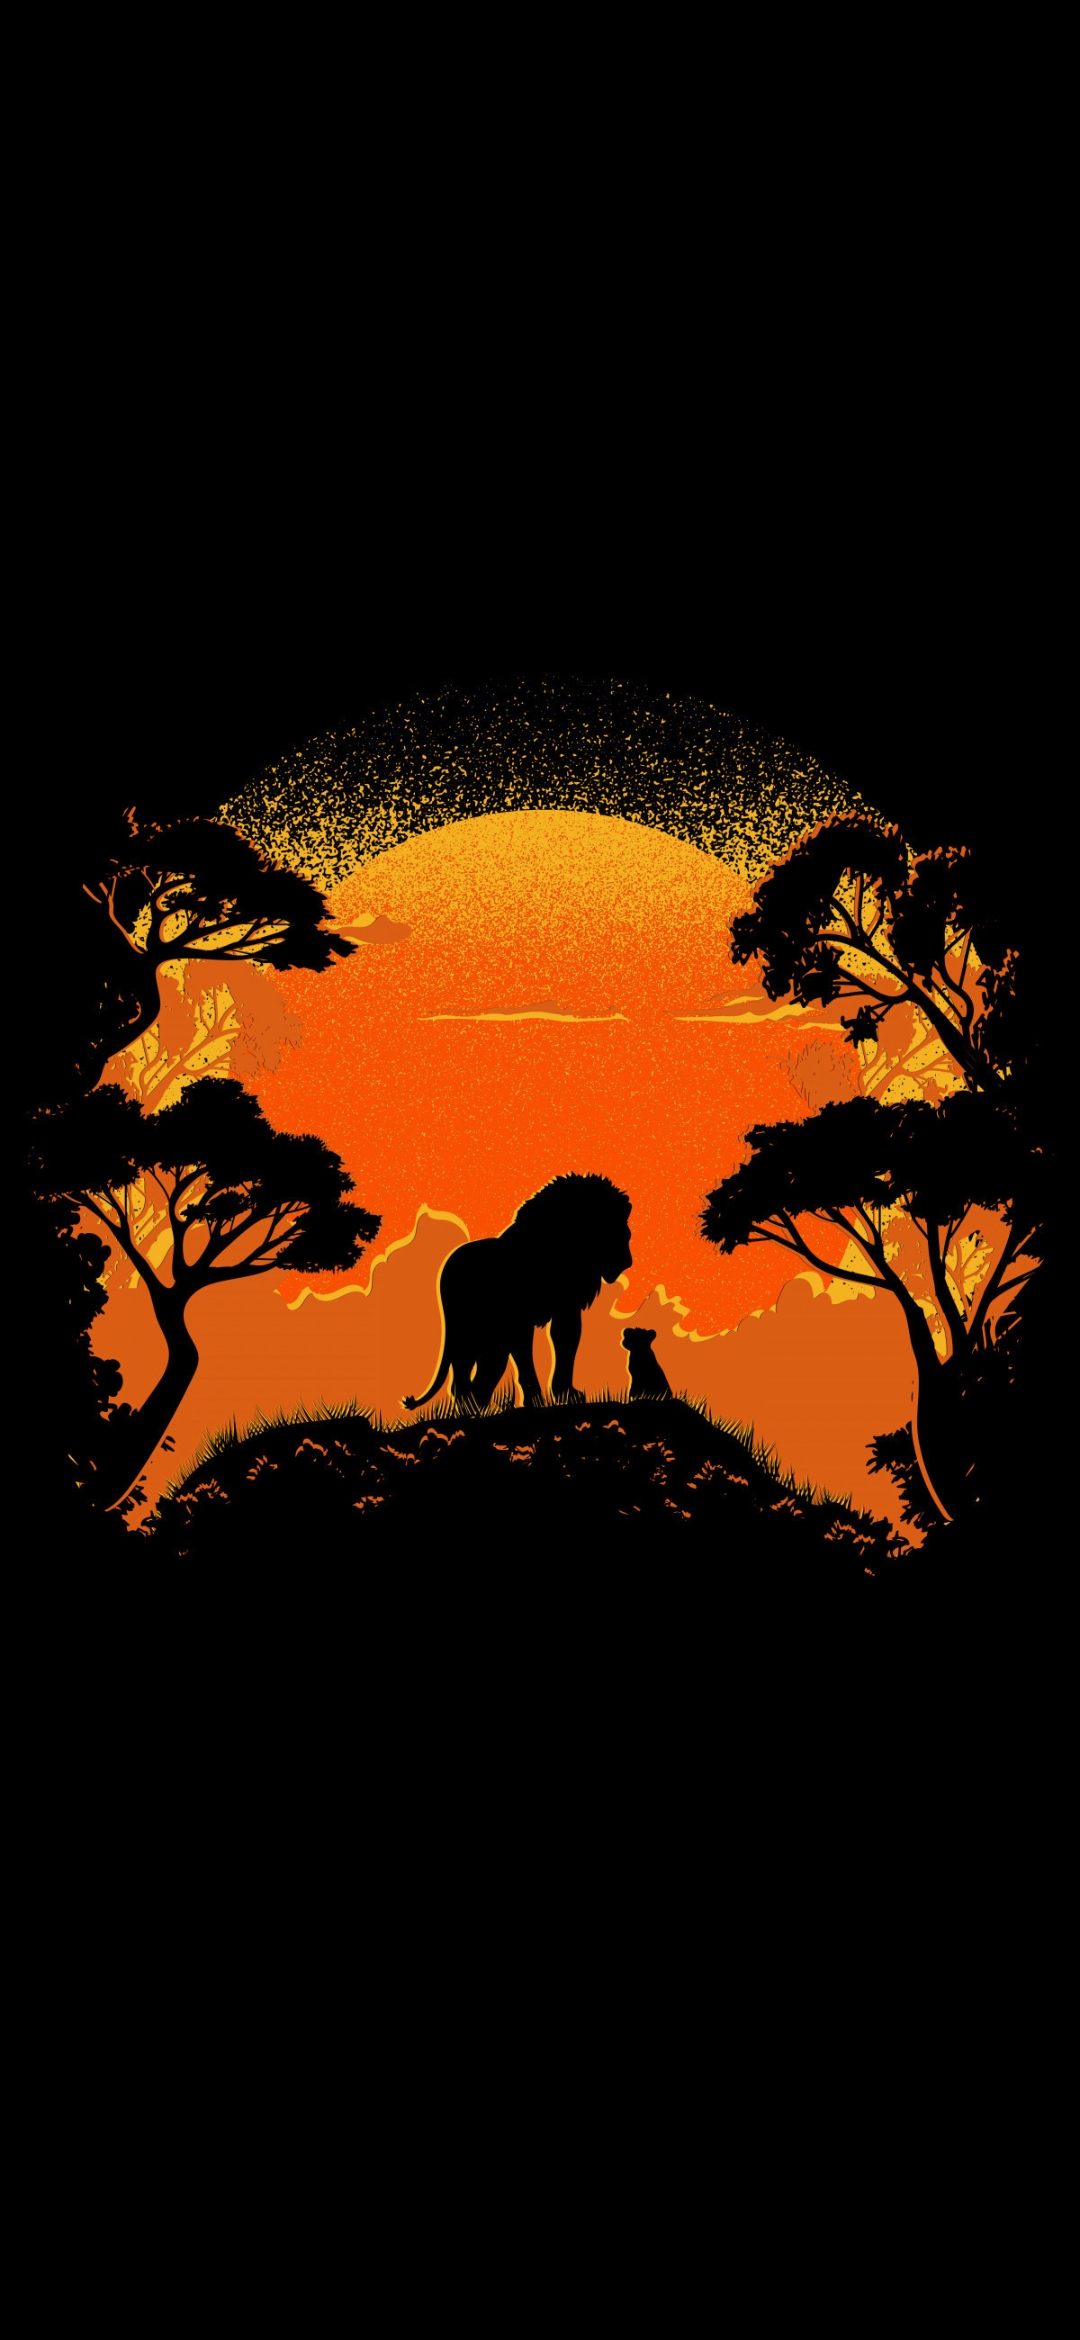 The Lion King Images Simba  Nala Wallpaper And Background  Lion King Nala  Png  Free Transparent PNG Clipart Images Download